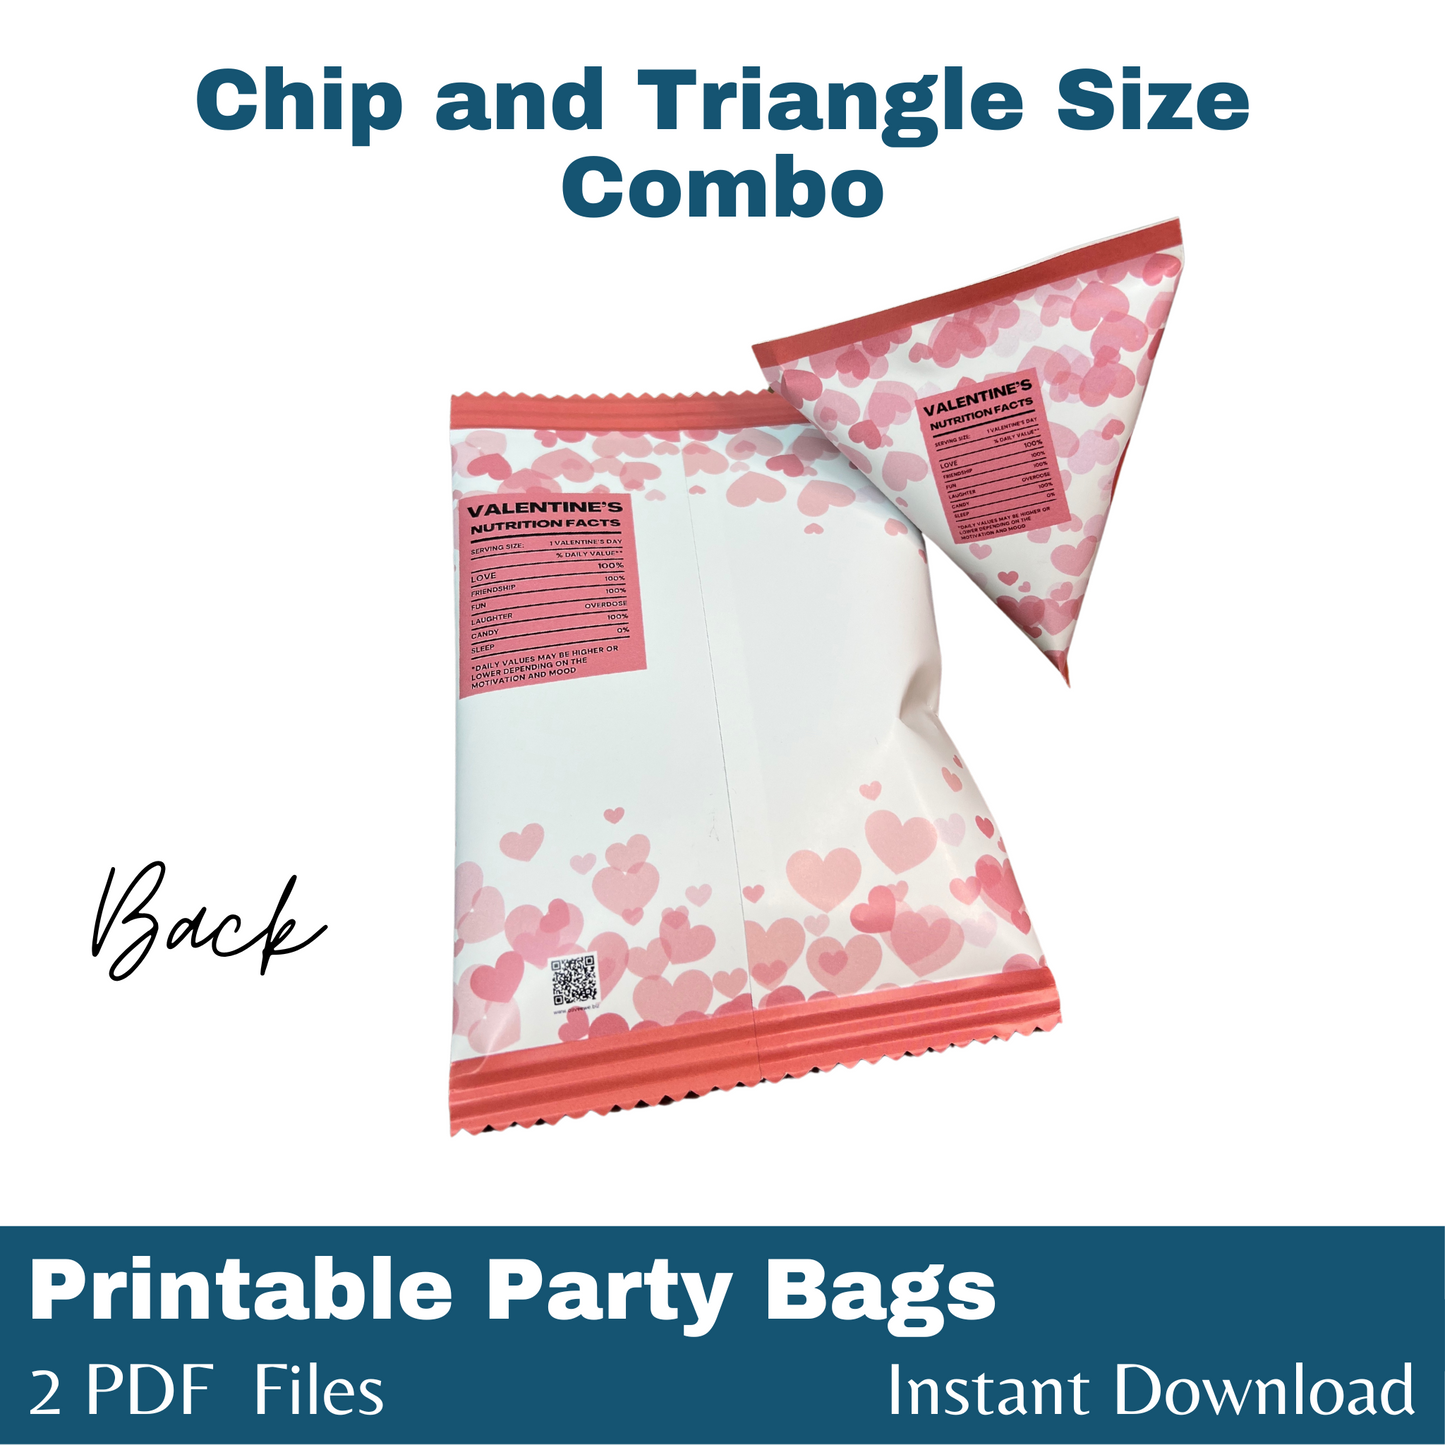 Classic Hearts Valentine's Party Bag Combo